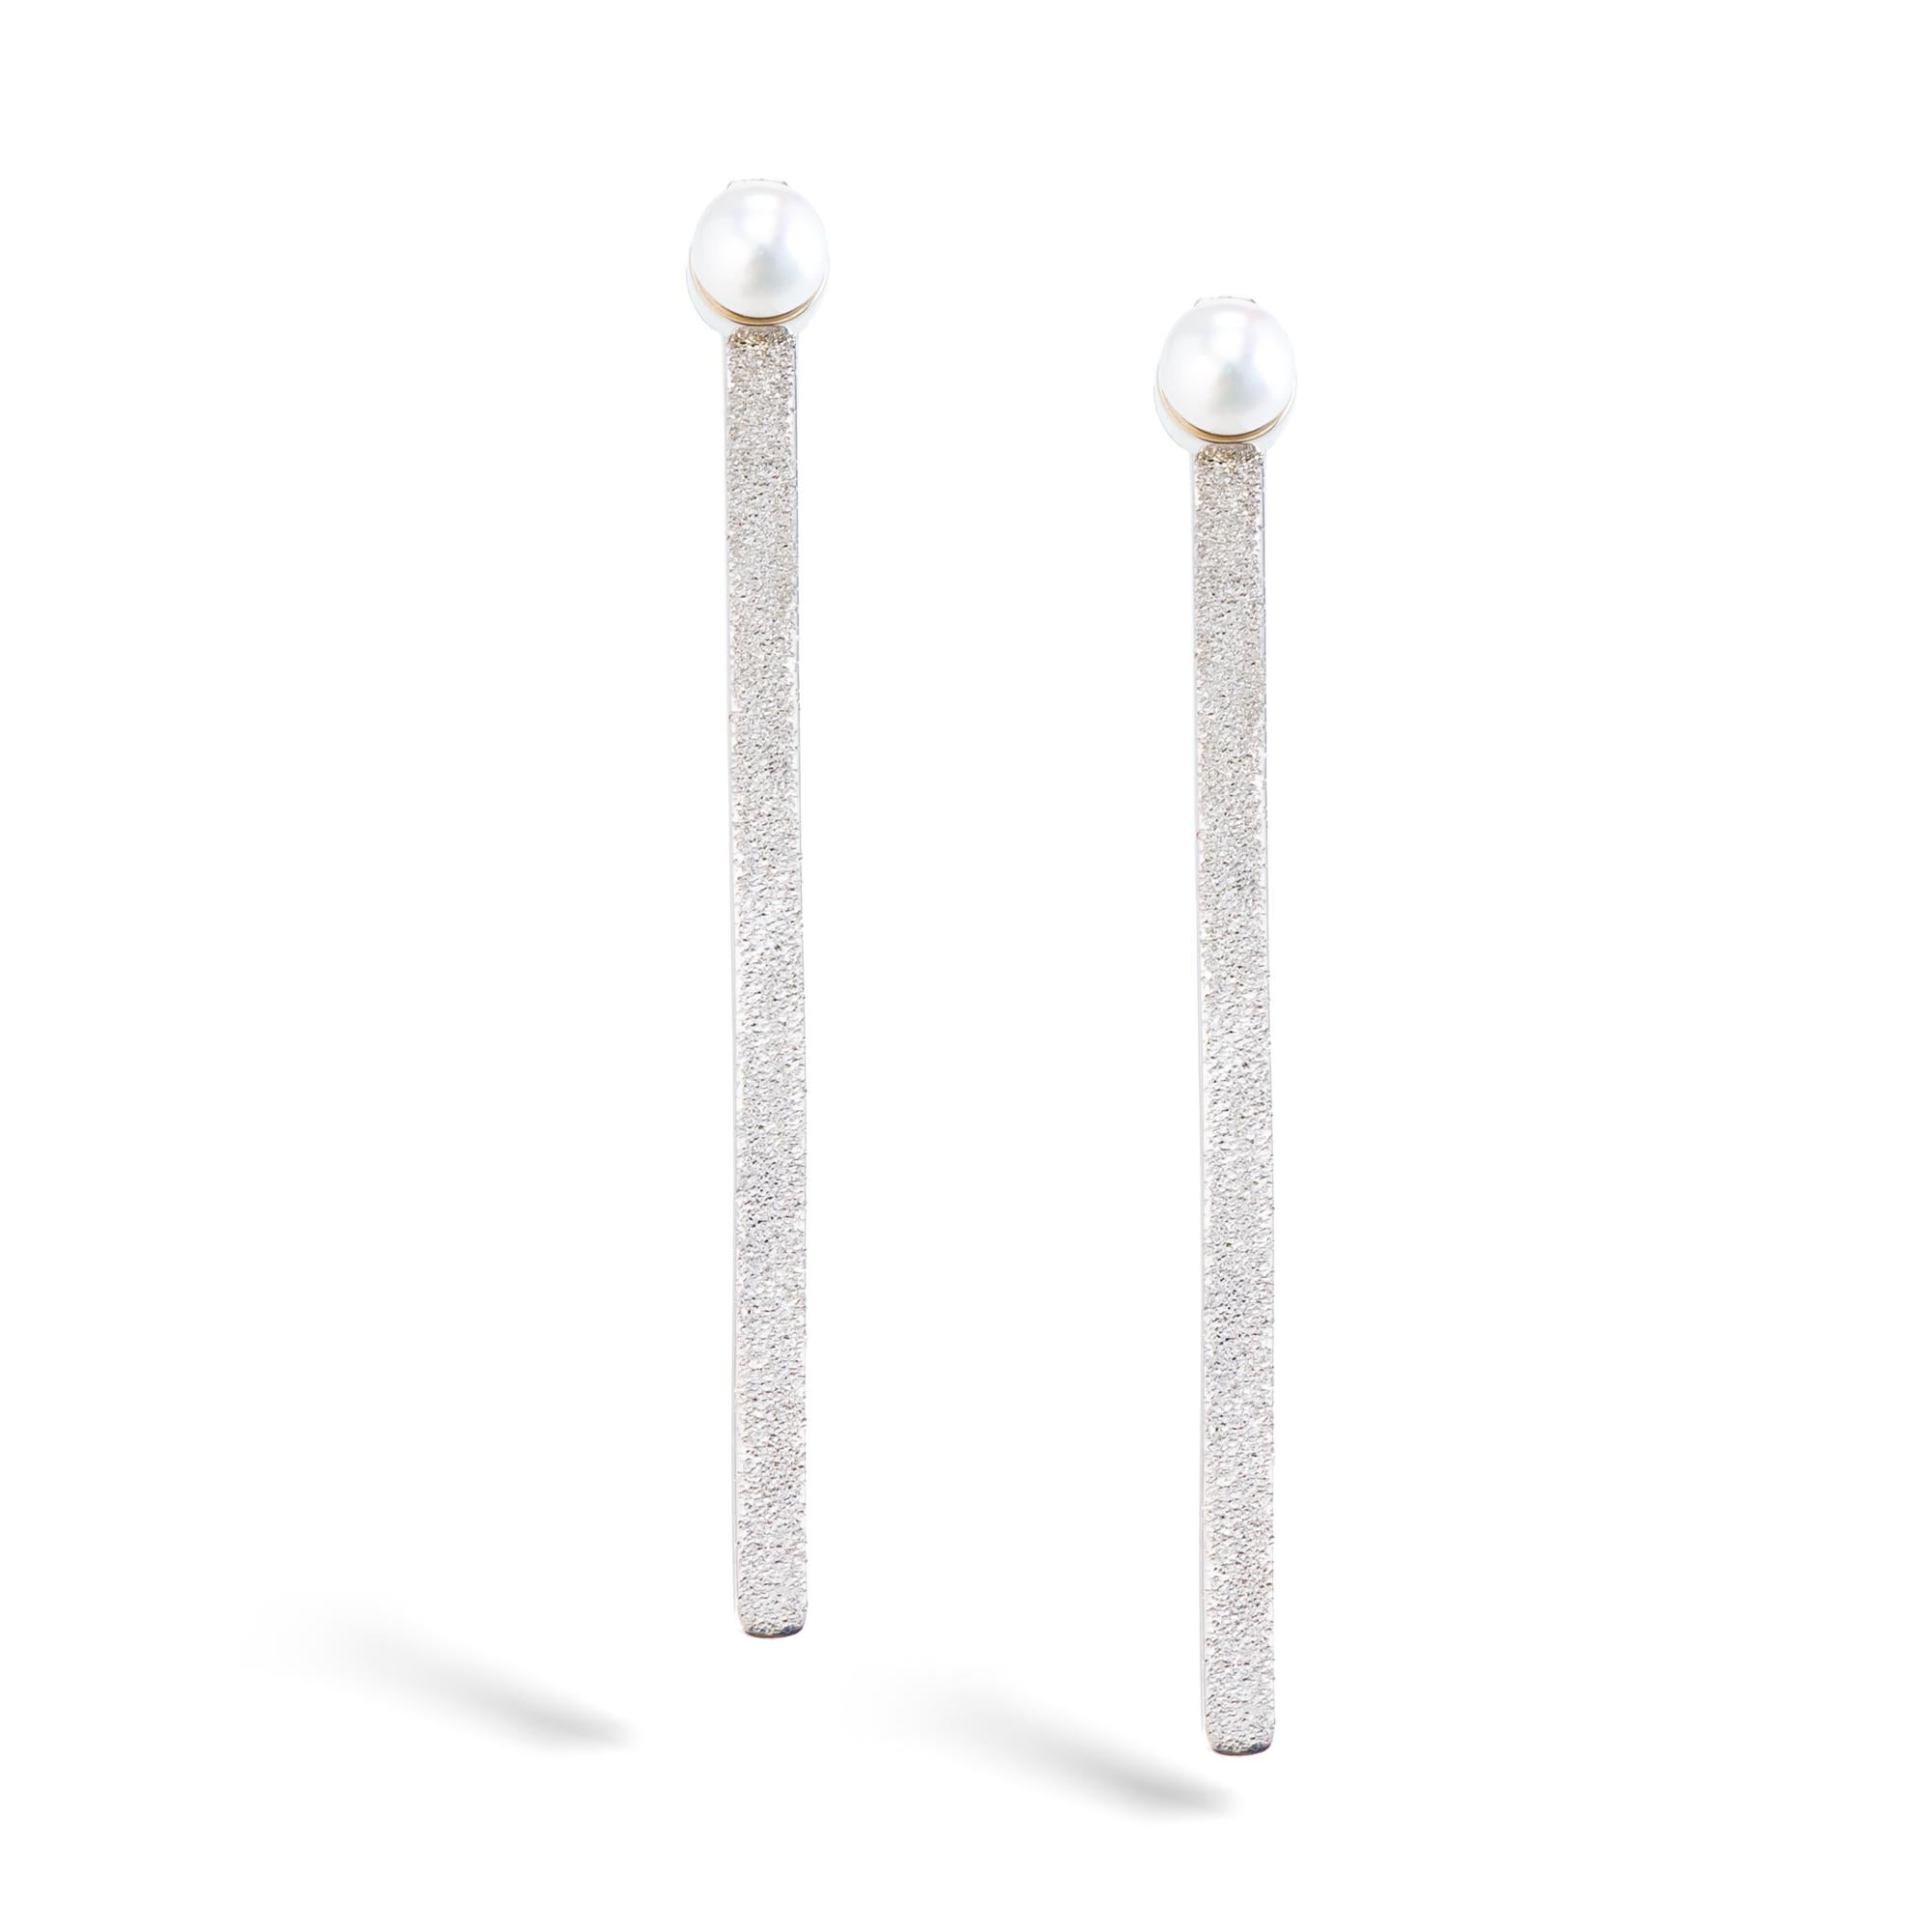 Contemporary Theodora D.  Moon Ray Earrings White Gold 18K Diamond cut / Freshwater Pearls For Sale